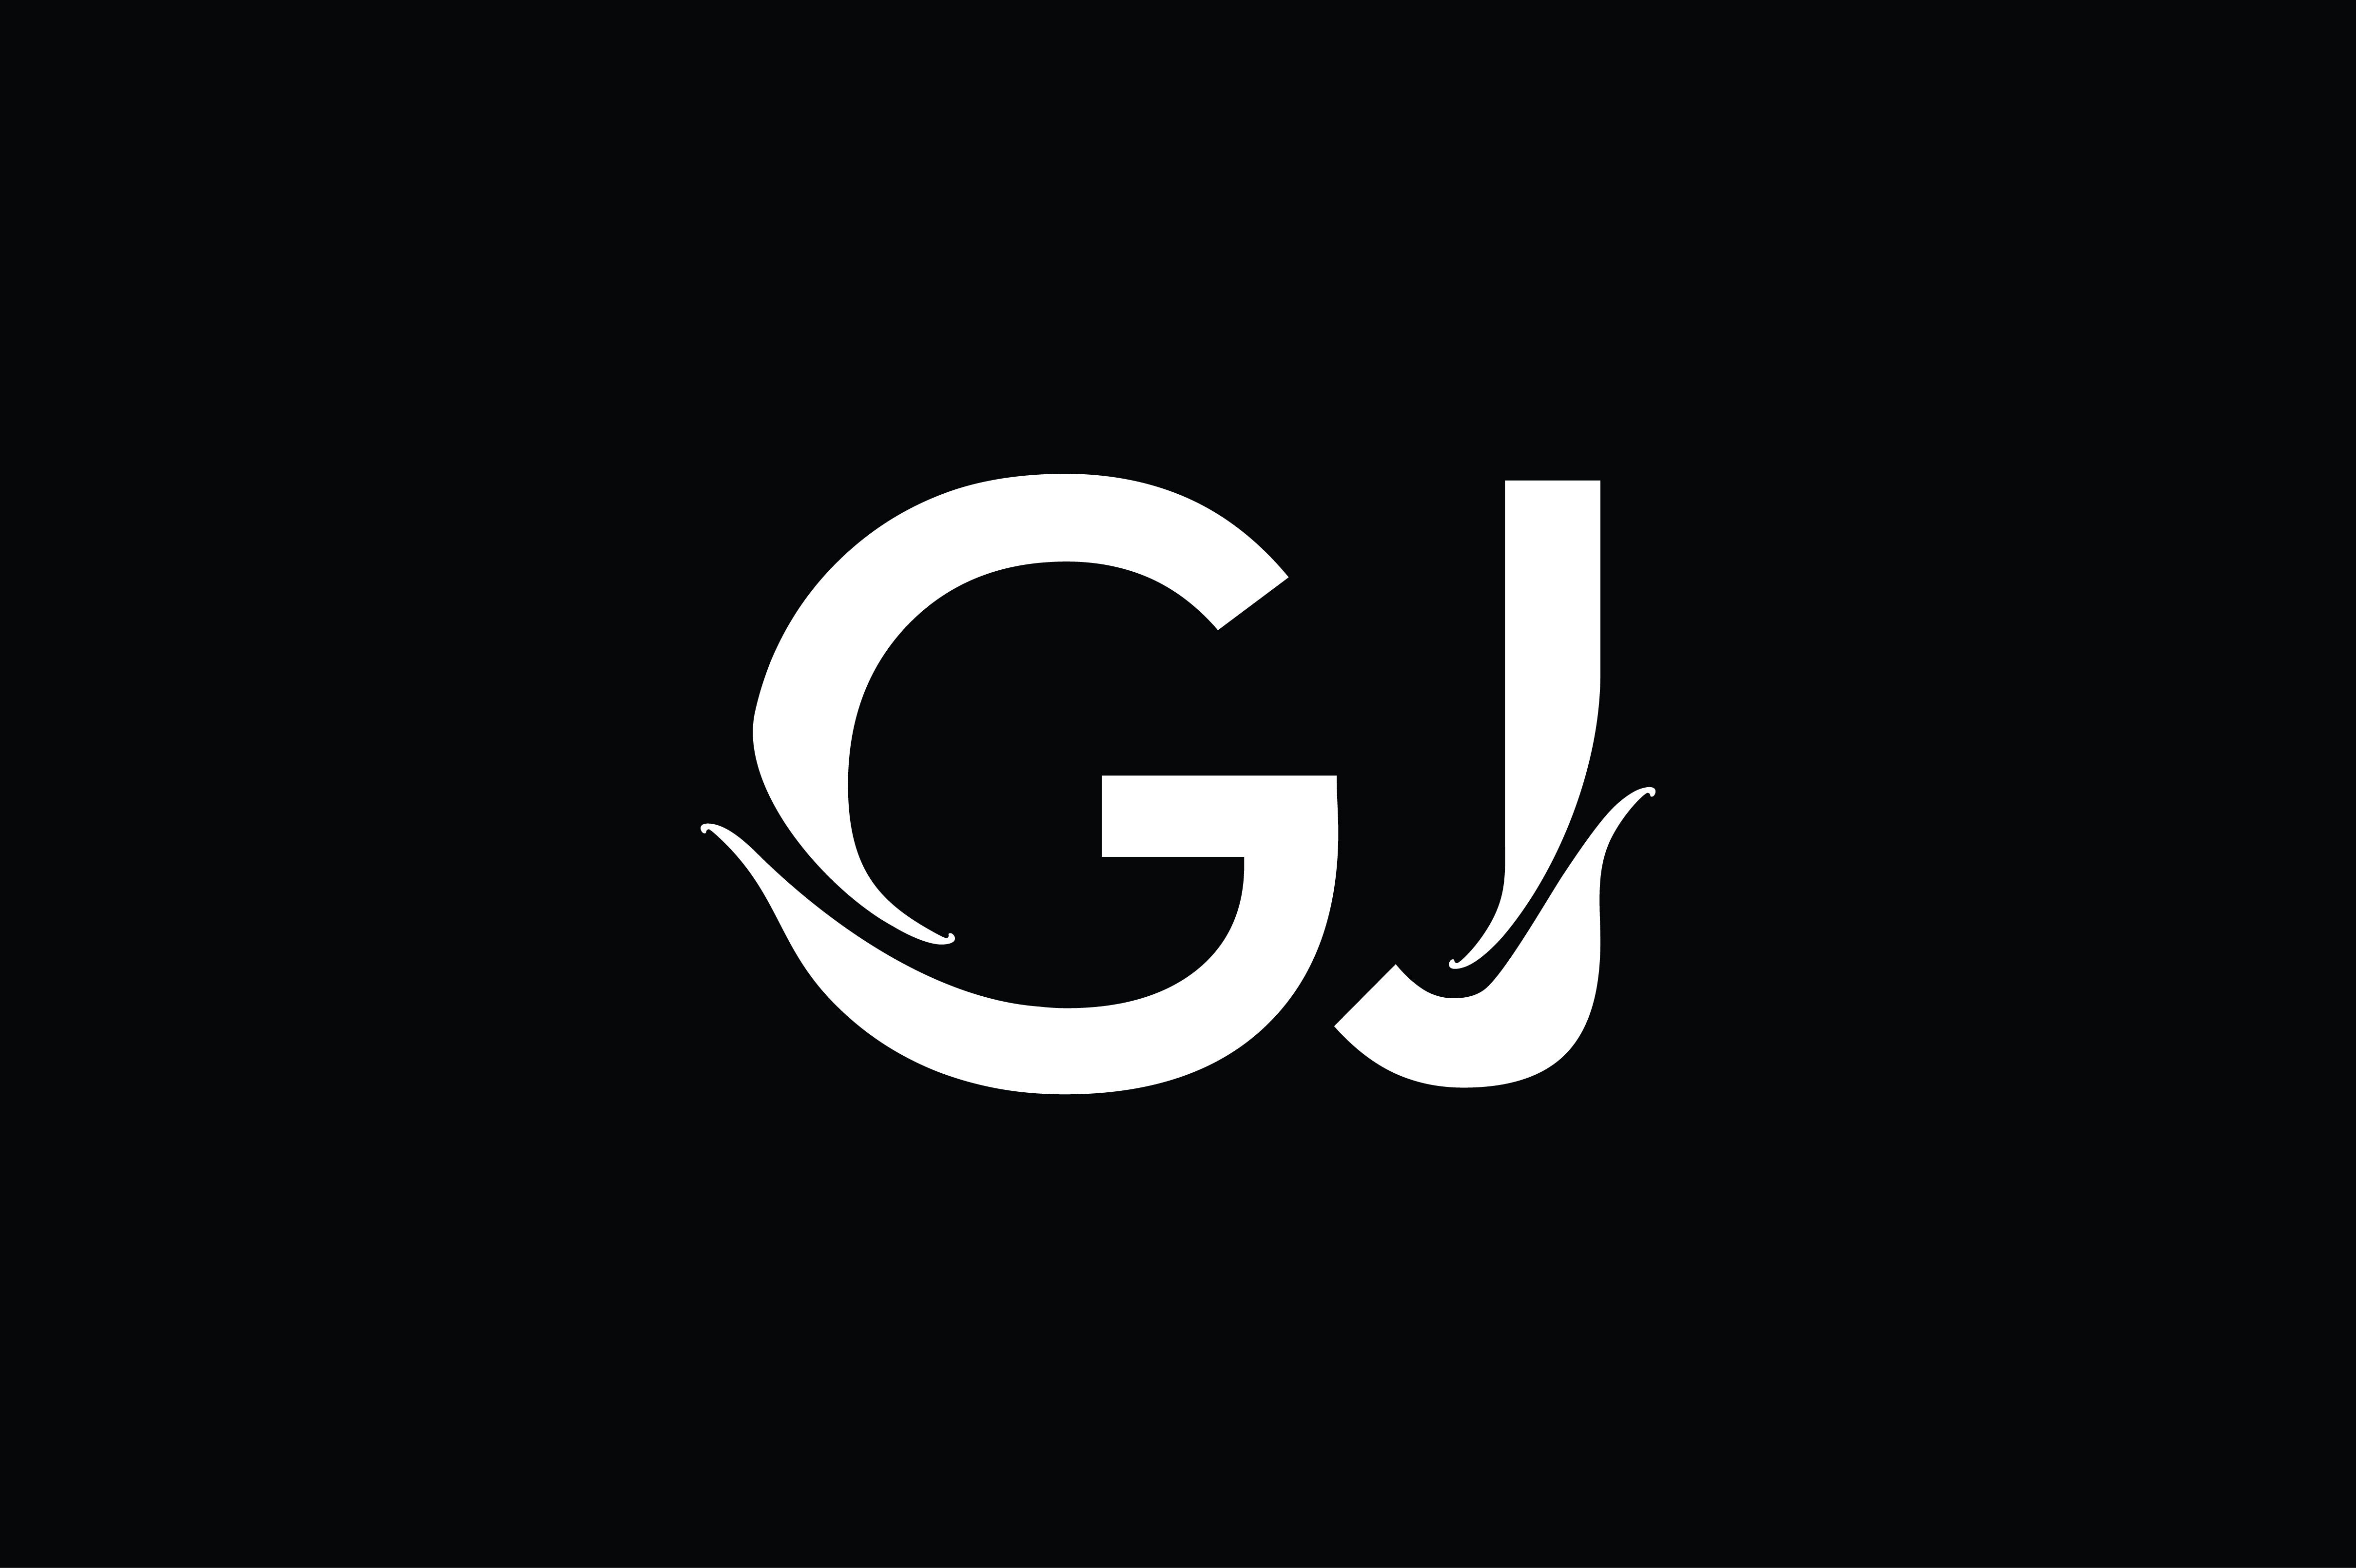 Gj Logo Design designs, themes, templates and downloadable graphic elements  on Dribbble